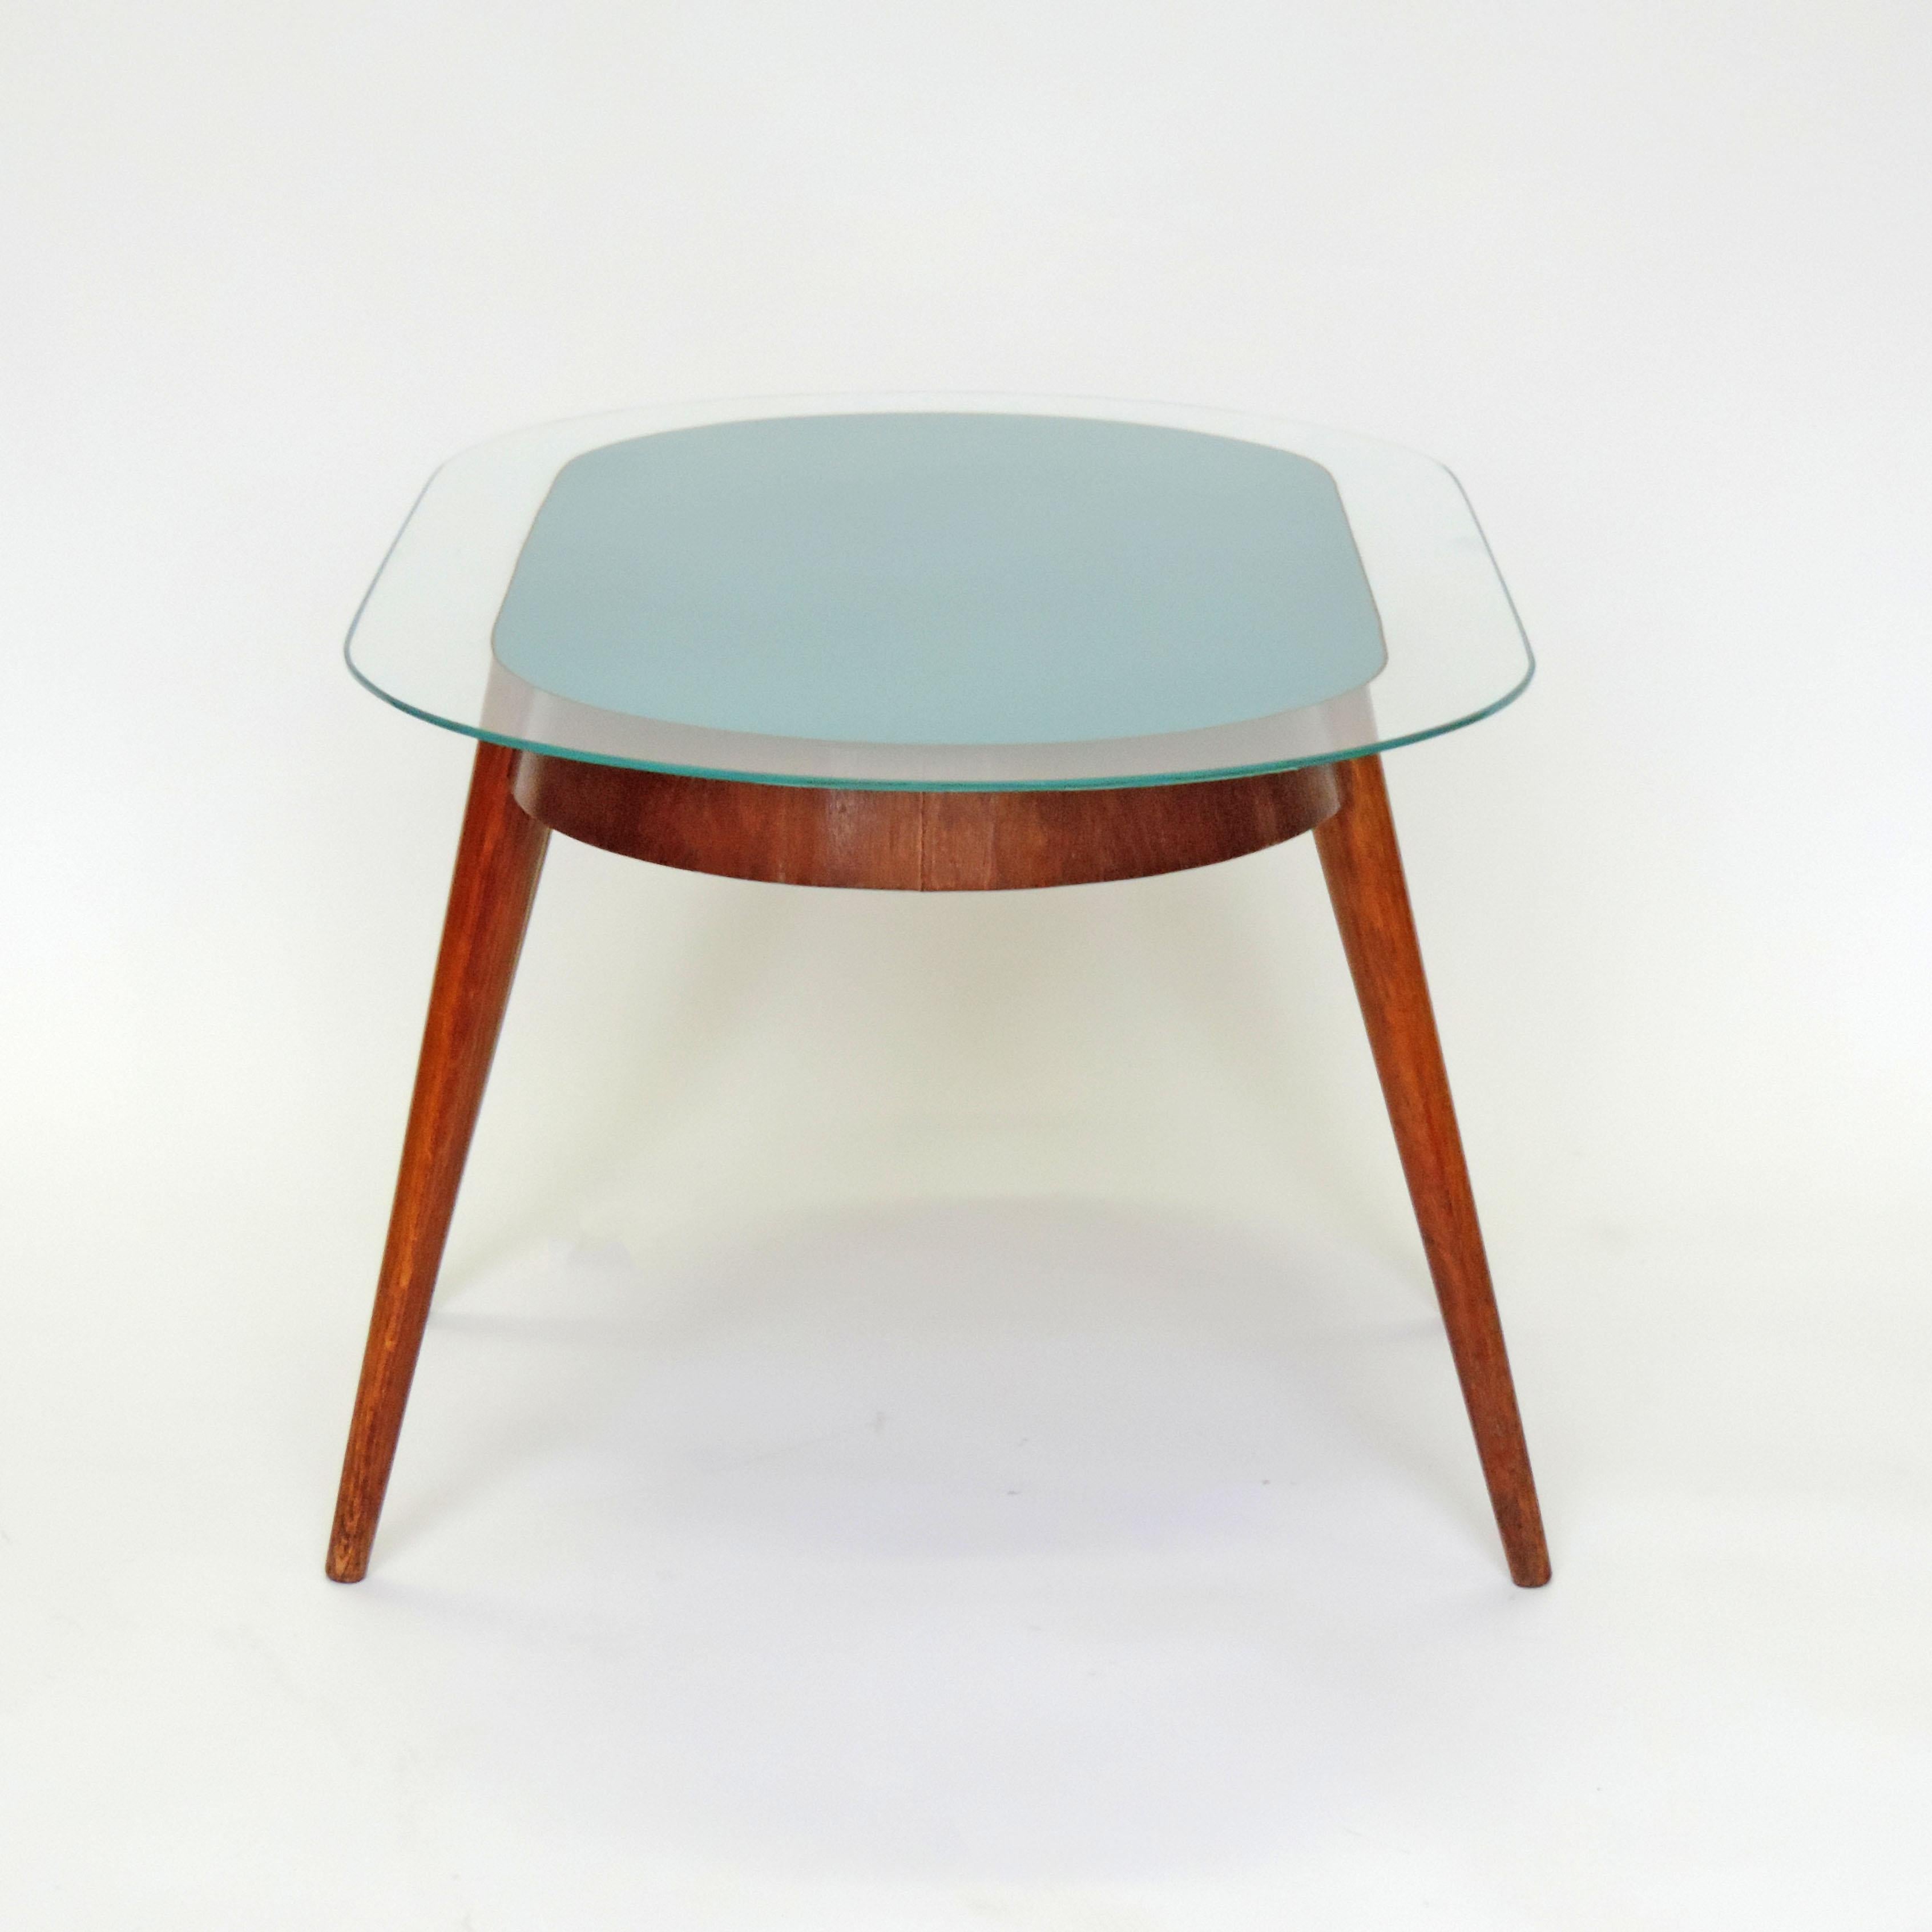 Unusual 1950s Italian coffee table in wood and light blue reverse painted glass.